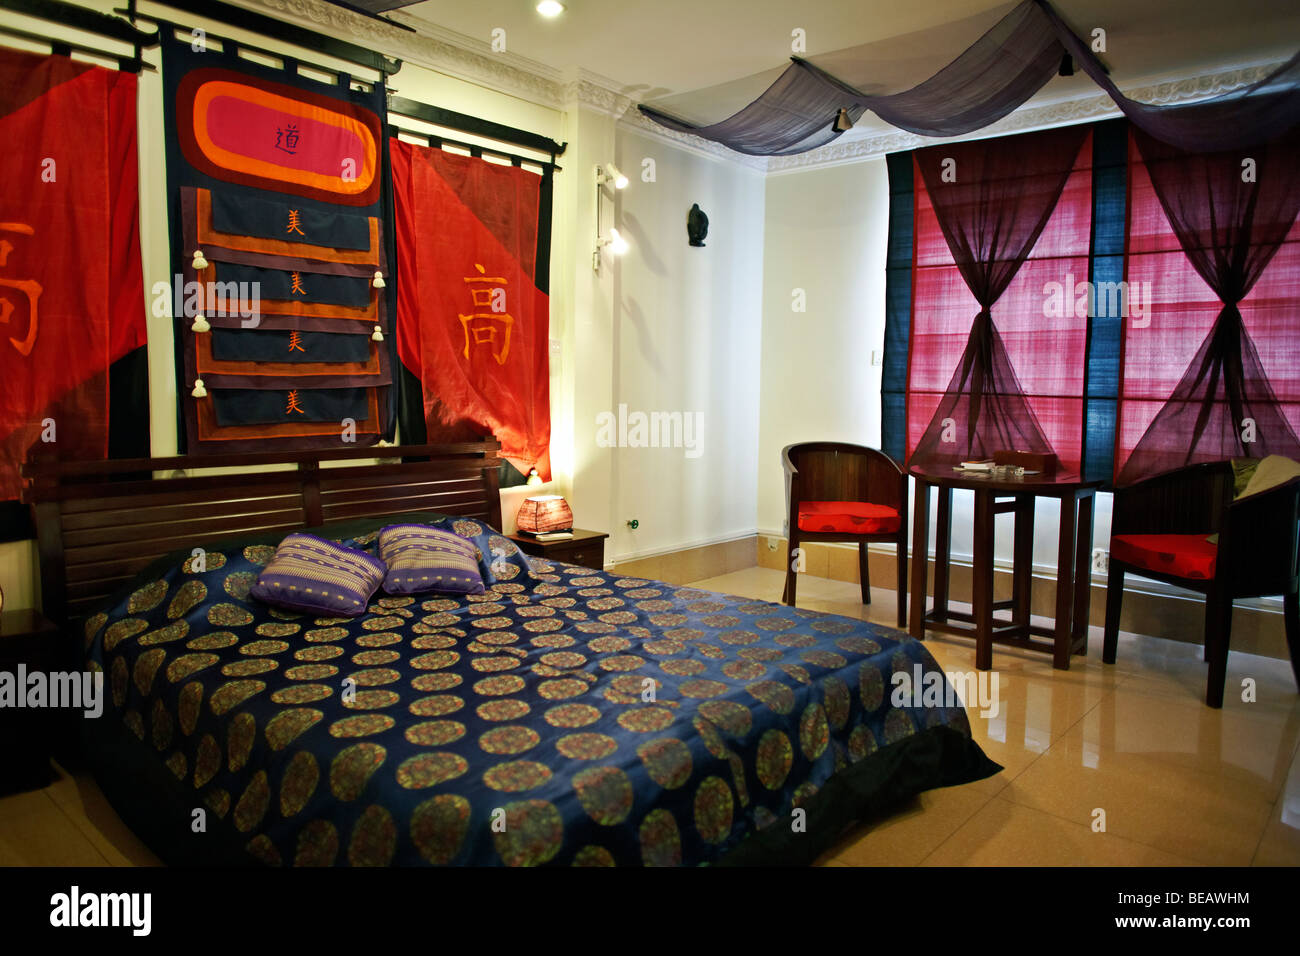 Cambodian traditionally decorated Balinese style bedroom suite in a boutique hotel at Phnom Penh, Cambodia S. E. Asia Stock Photo